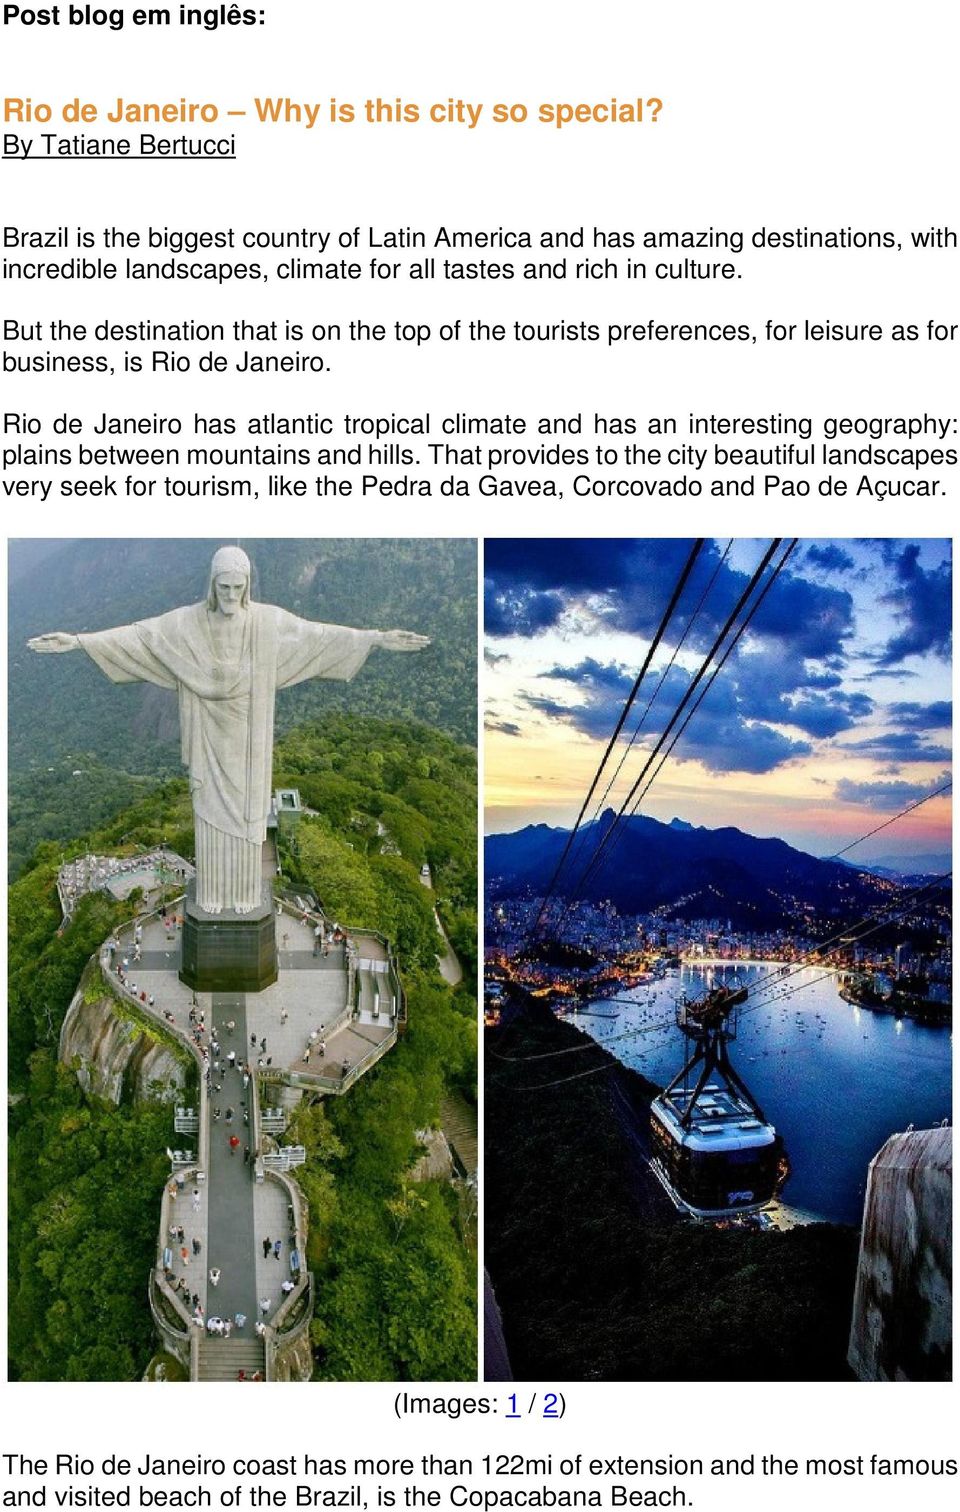 But the destination that is on the top of the tourists preferences, for leisure as for business, is Rio de Janeiro.